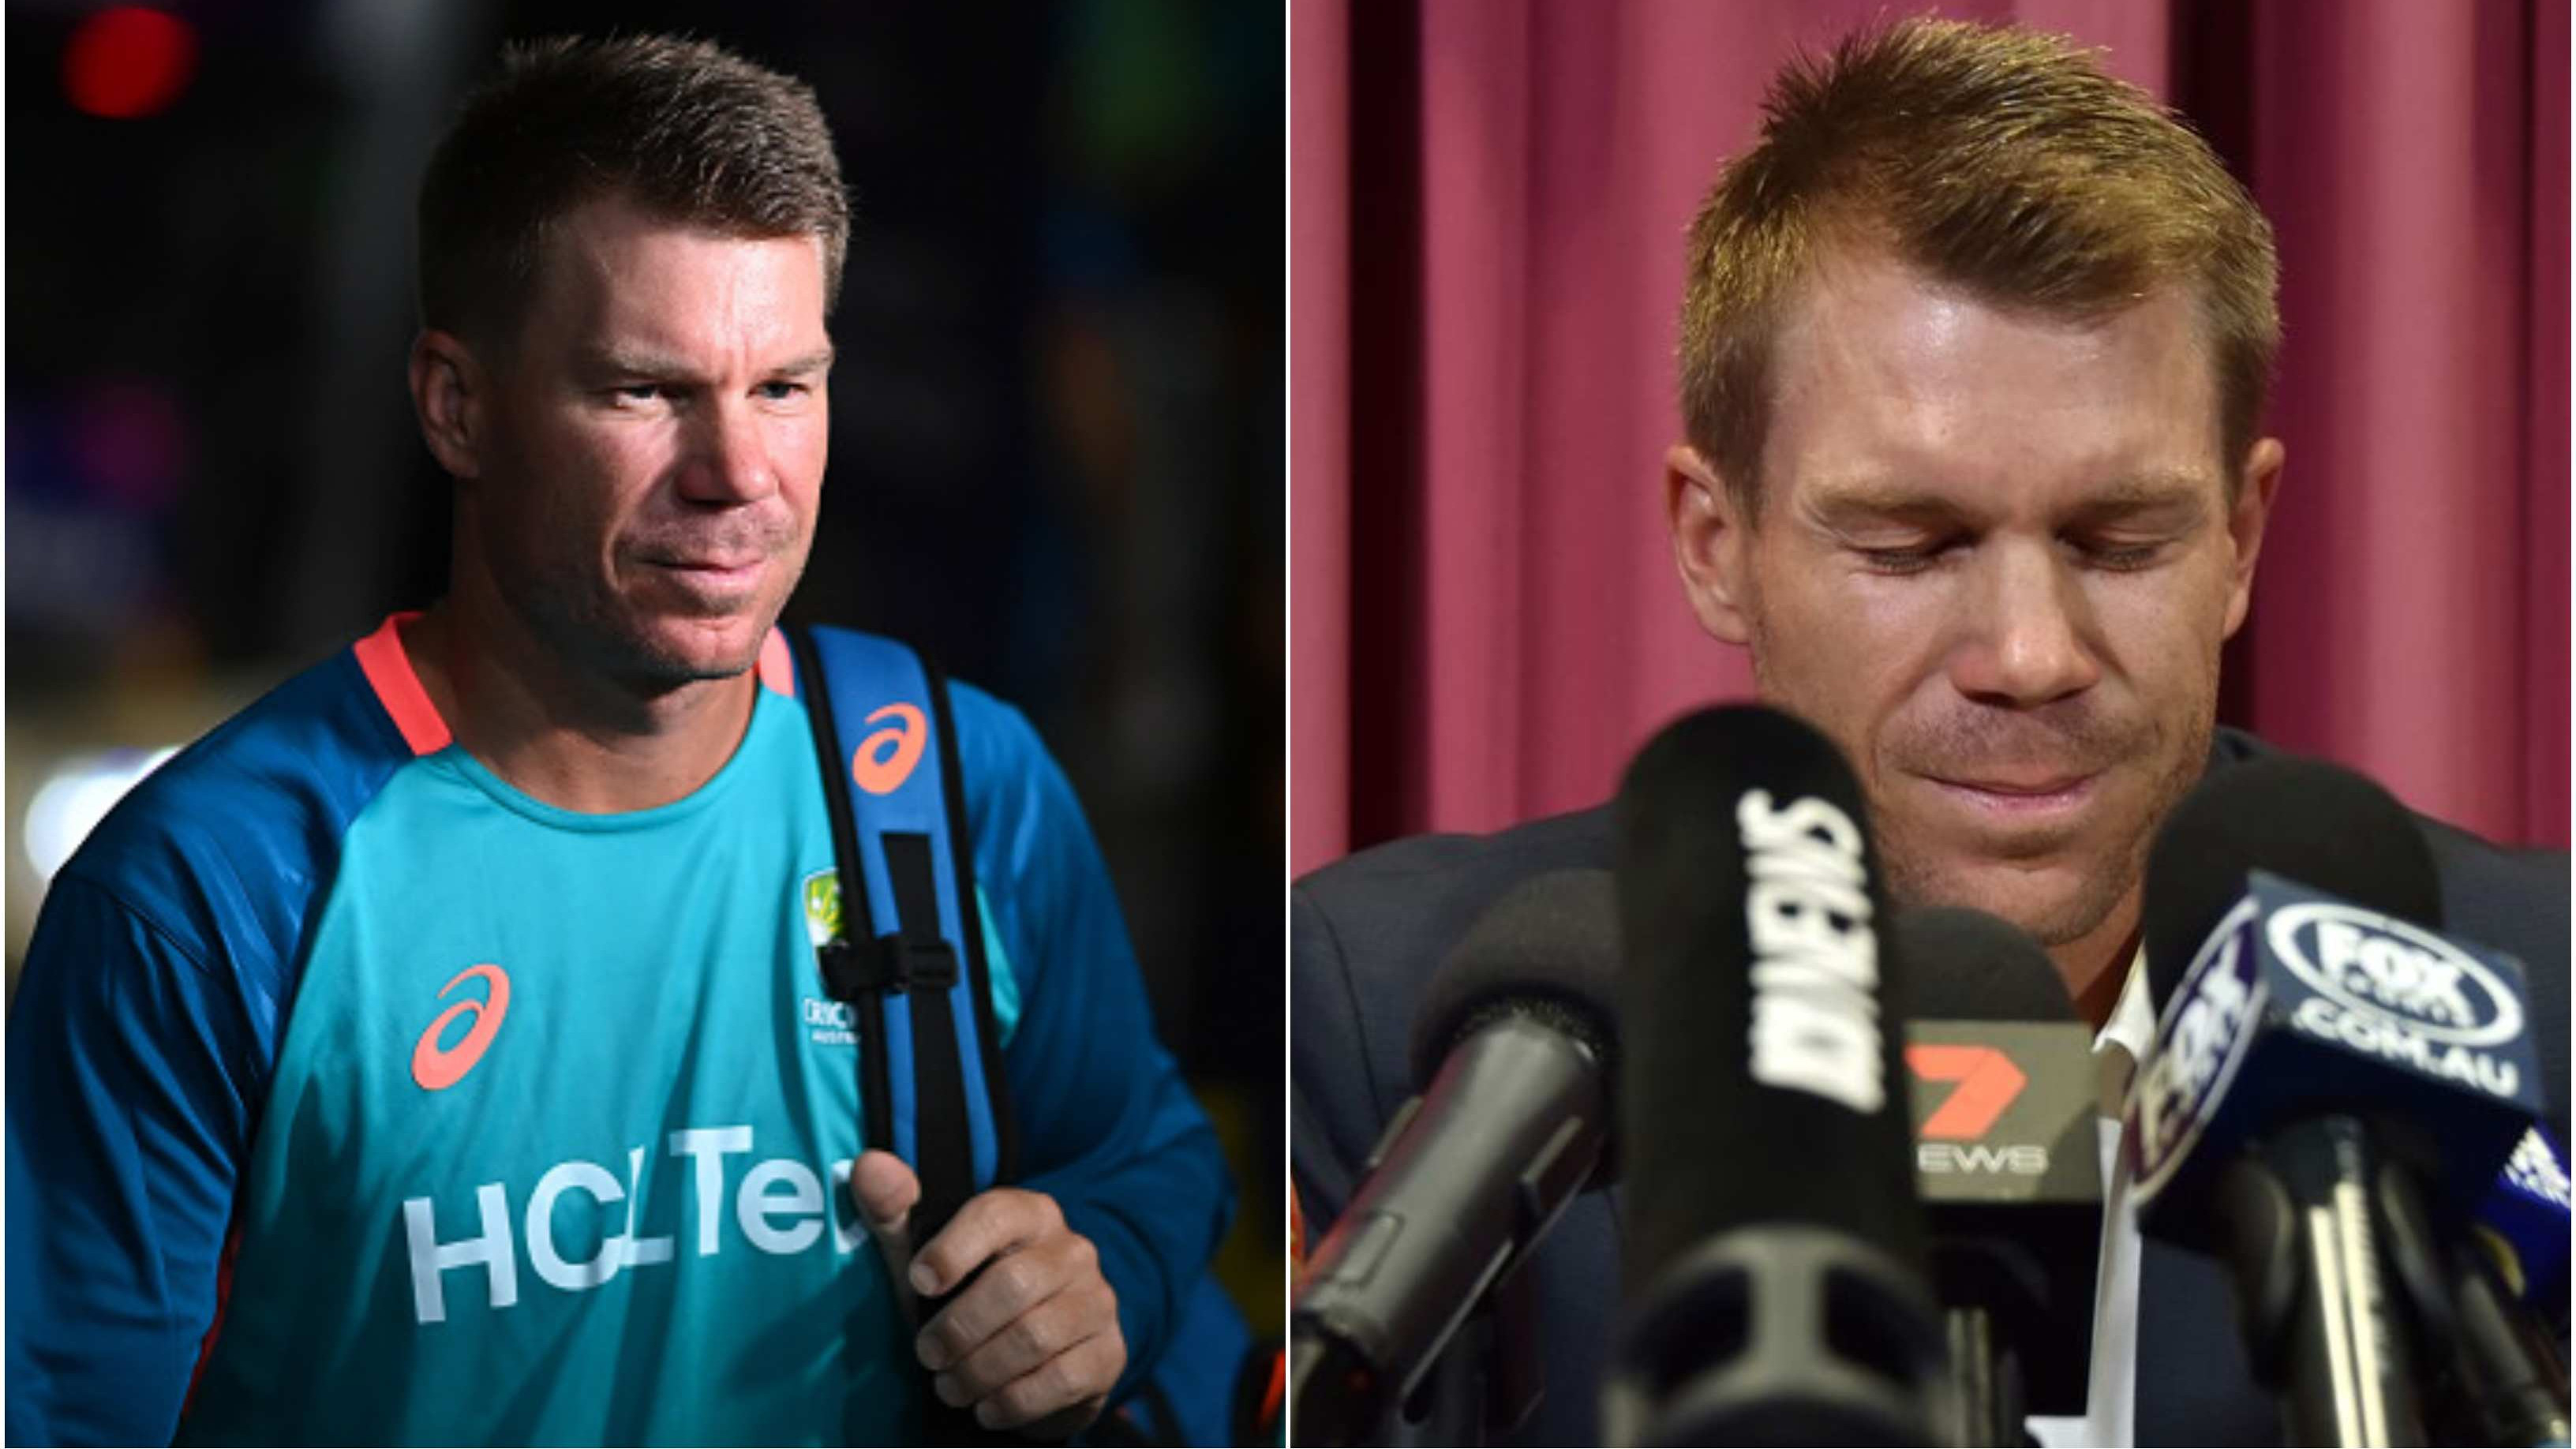 “Great to go out knowing I’m not going to cop it any more”: David Warner on his involvement in ‘sandpaper gate’